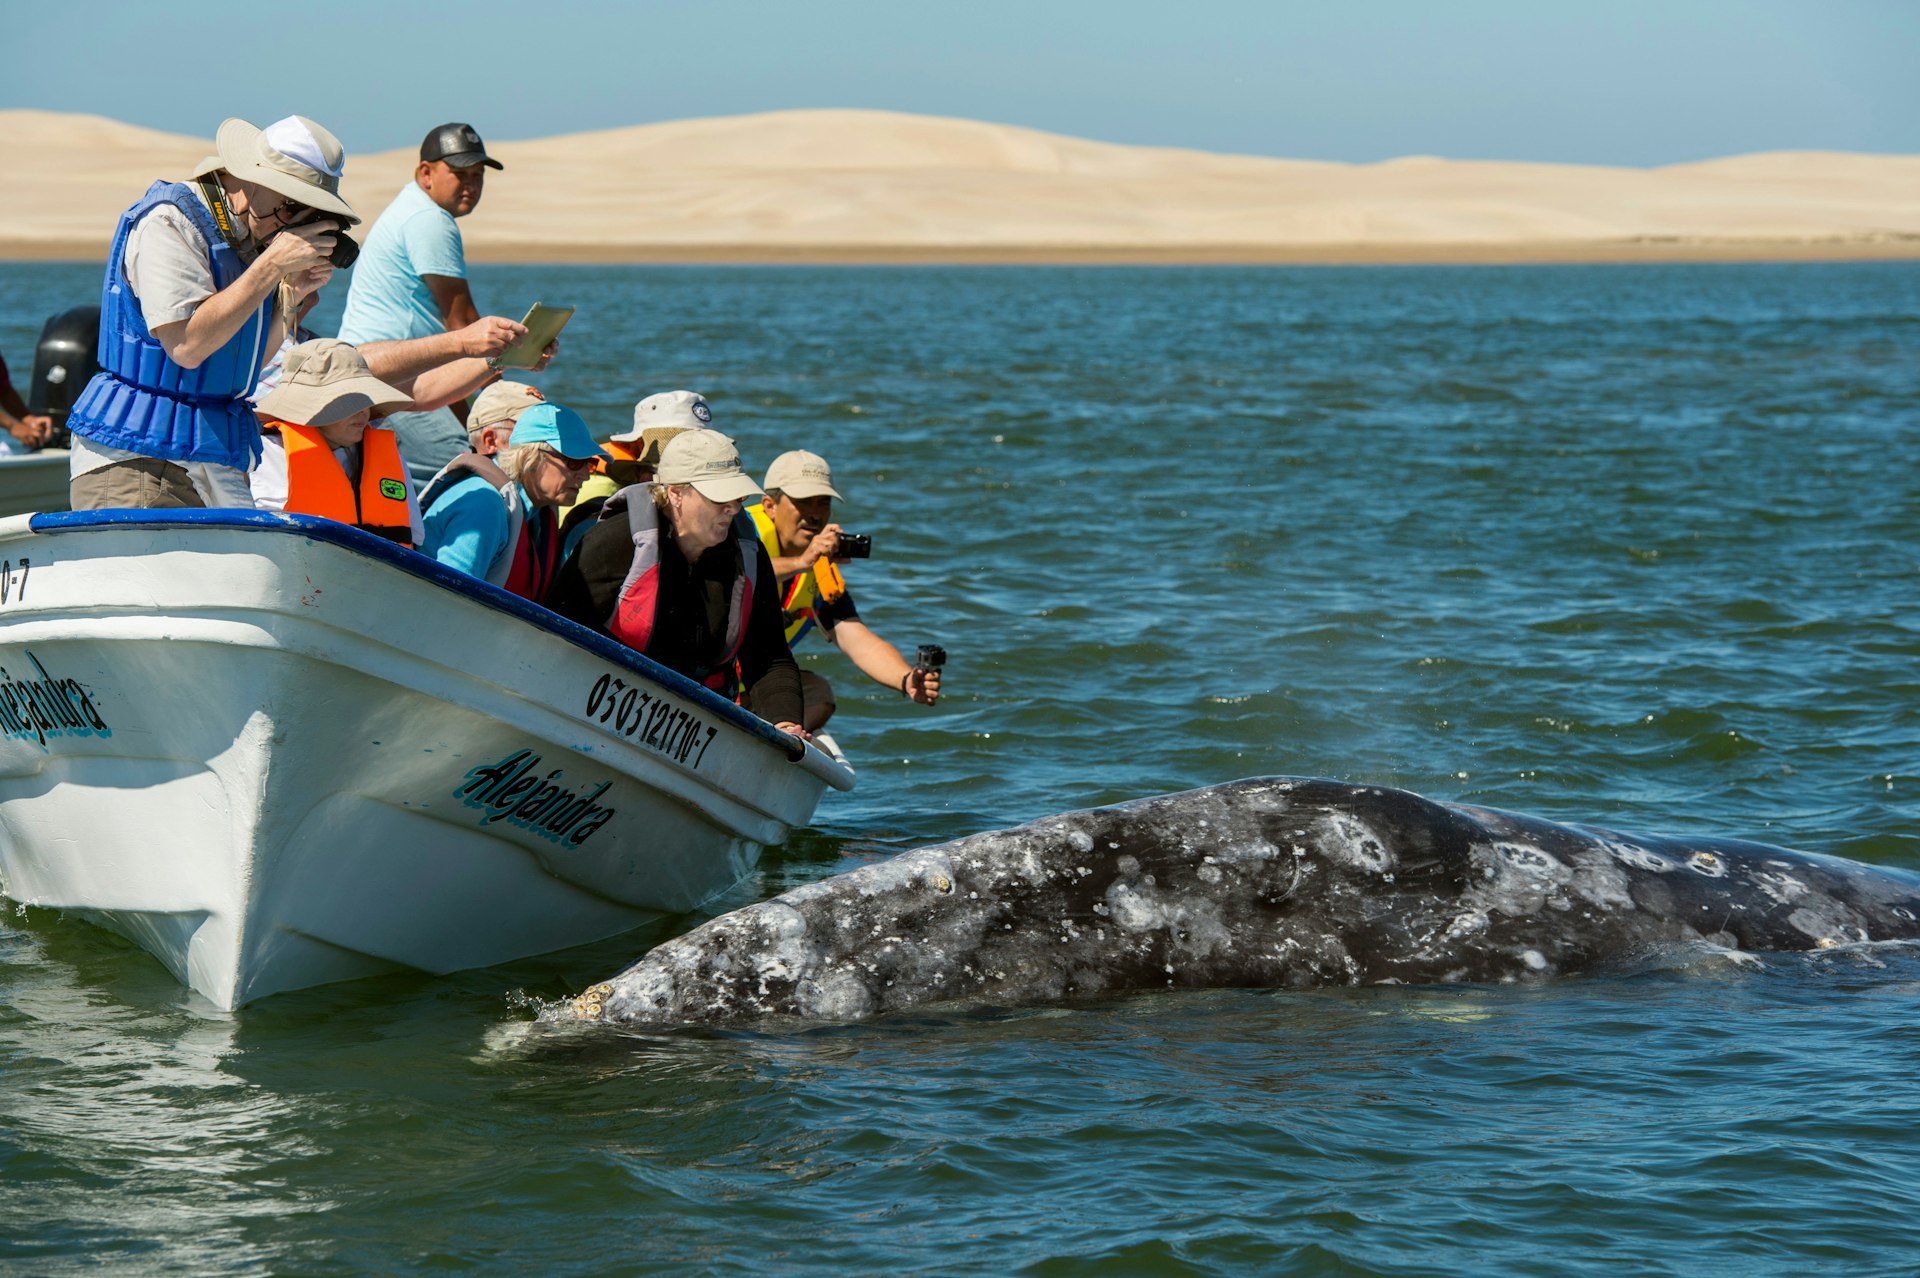 Getting up close to whales is one alternative to lazing on a beach in Baja California. Photo by Wolfgang Kaehler / LightRocket / Getty Images